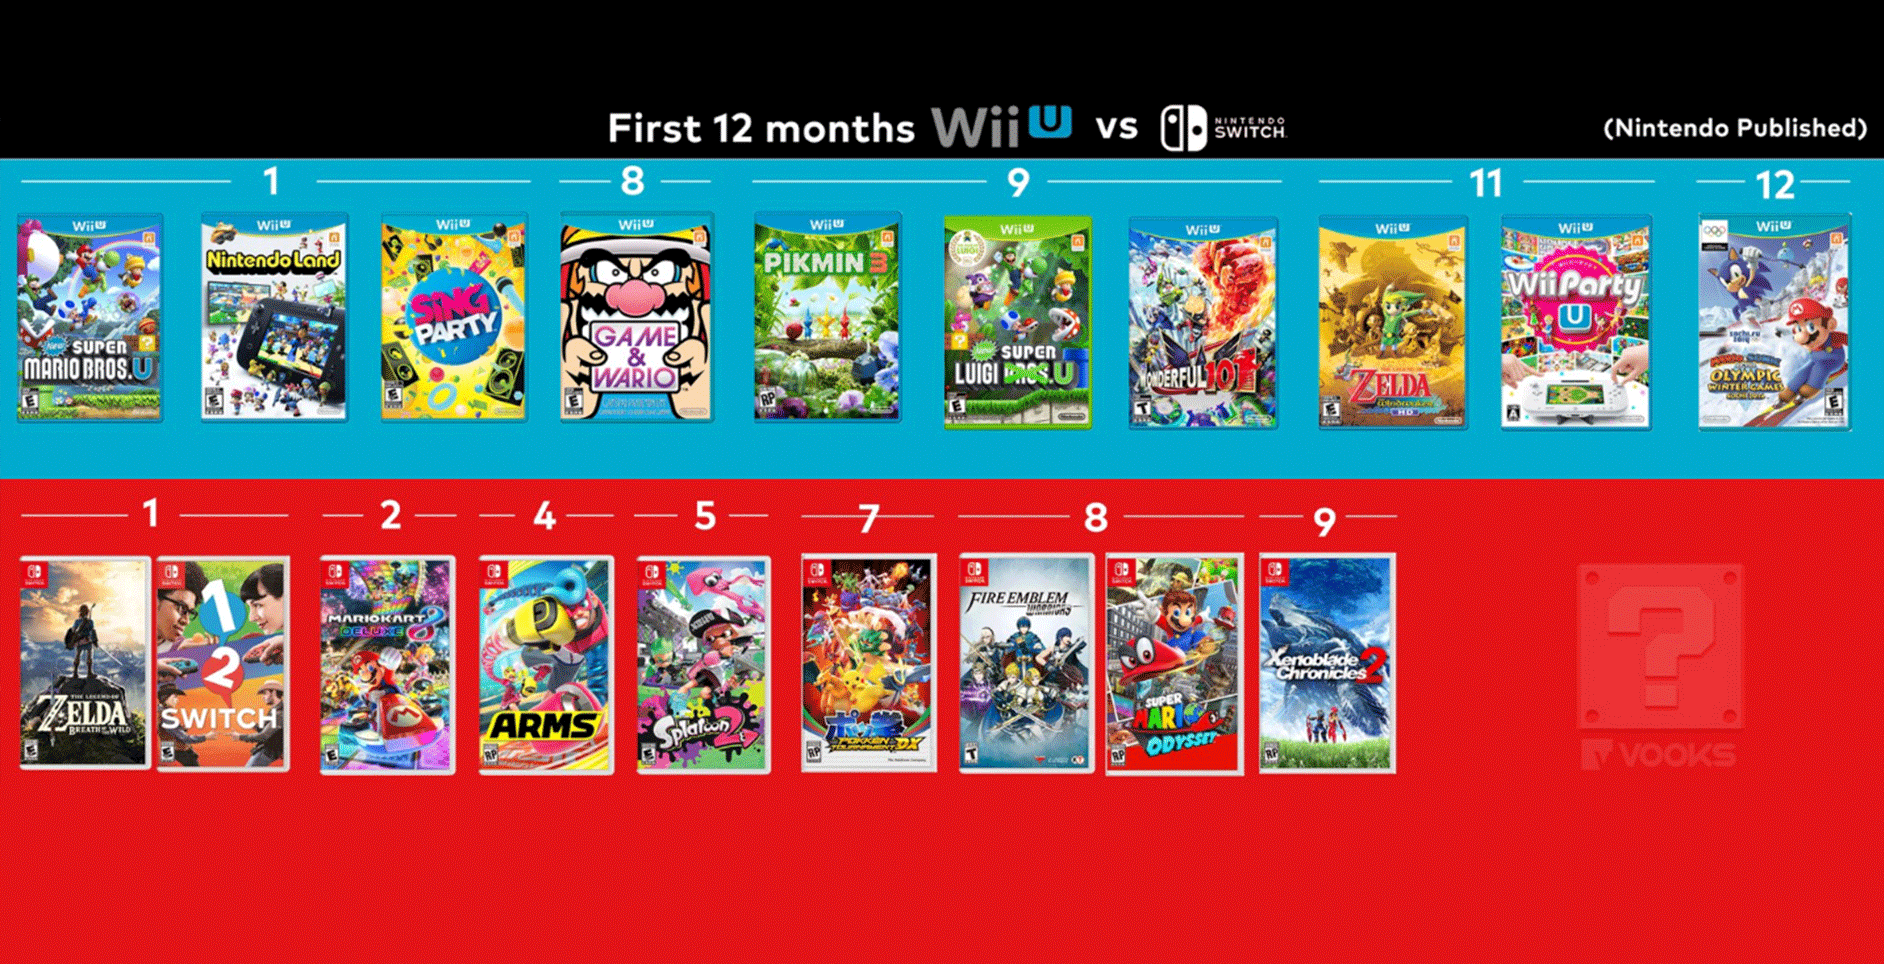 The Nintendo Switch S Lineup Of Games Is Already Better Than The Wii U S First Year